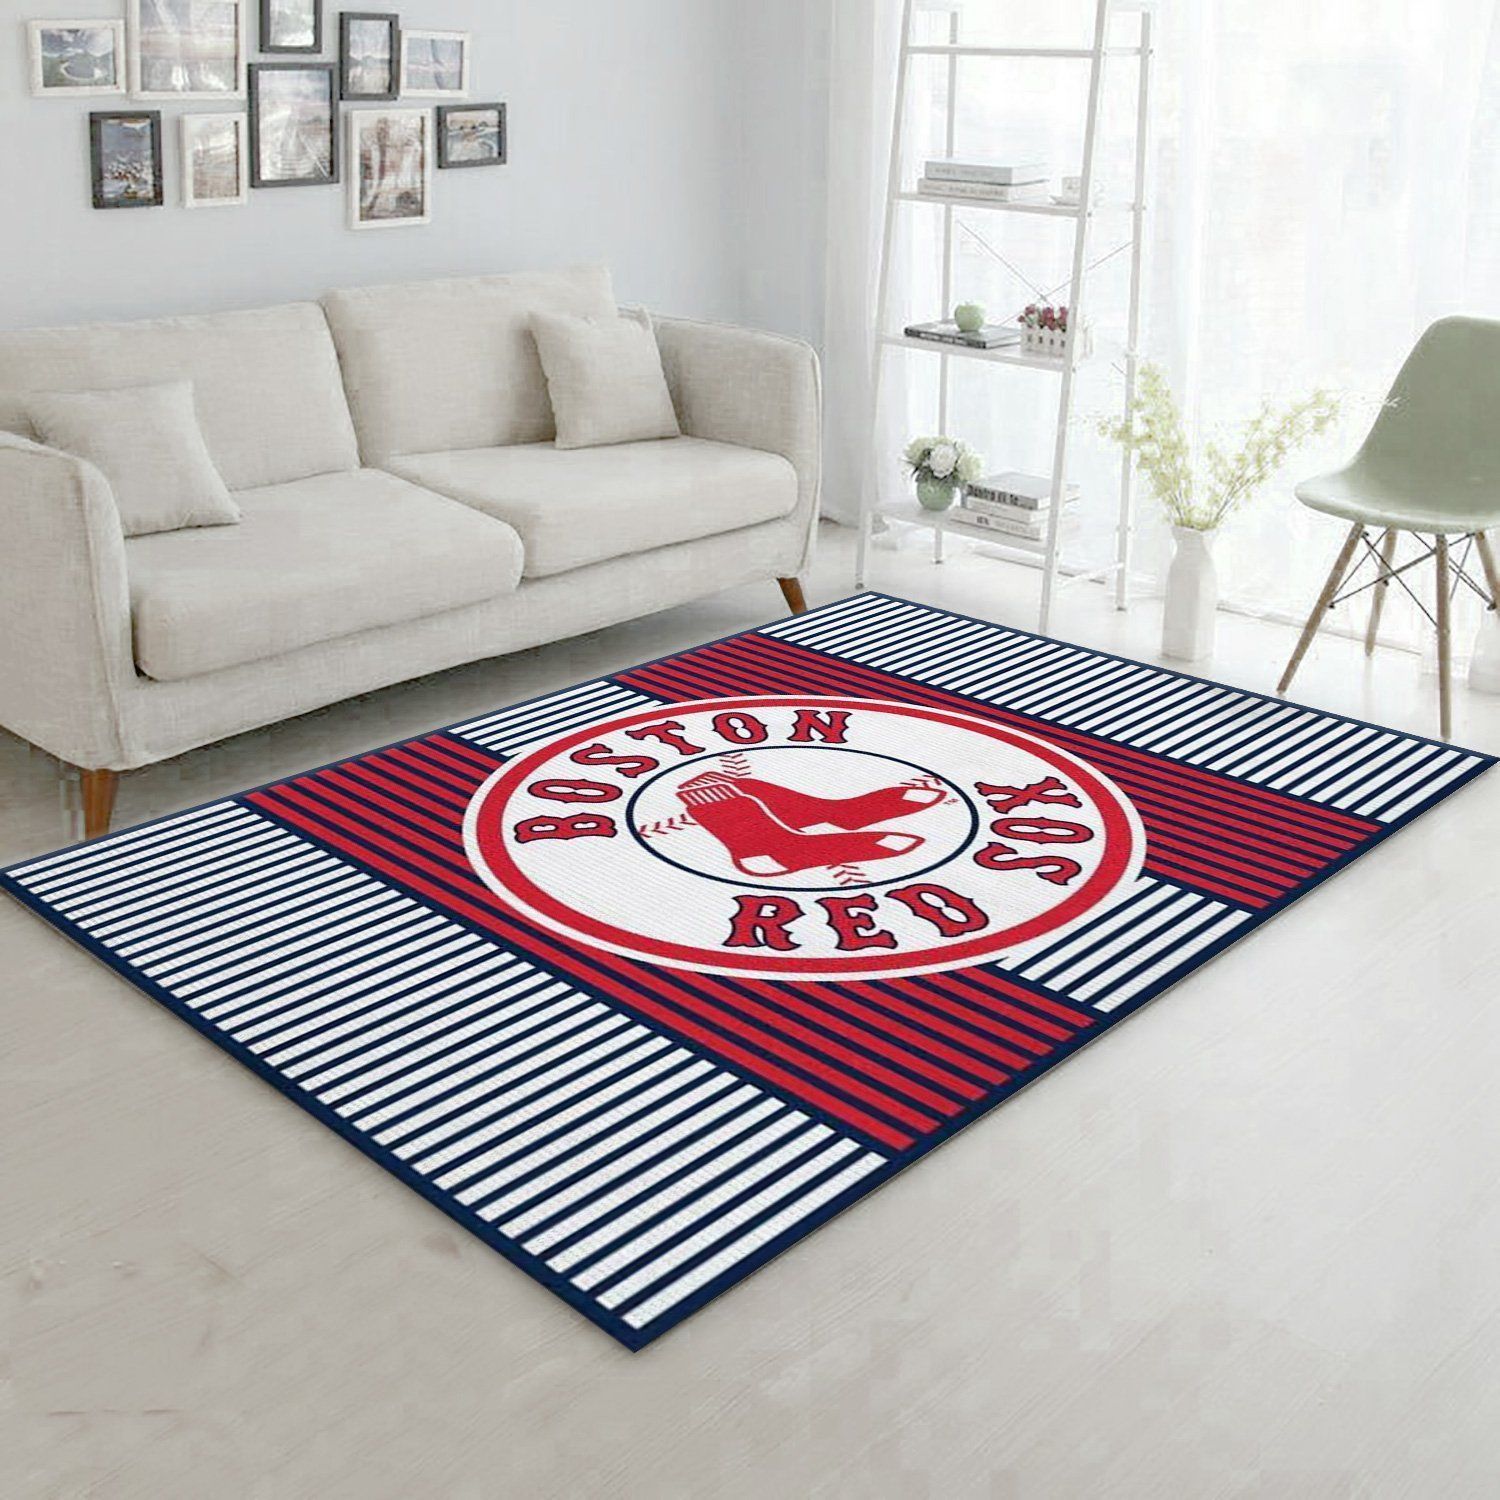 Boston Red Sox Imperial Champion Rug Area Rug For Christmas, Living room and bedroom Rug, Family Gift US Decor - Indoor Outdoor Rugs 1